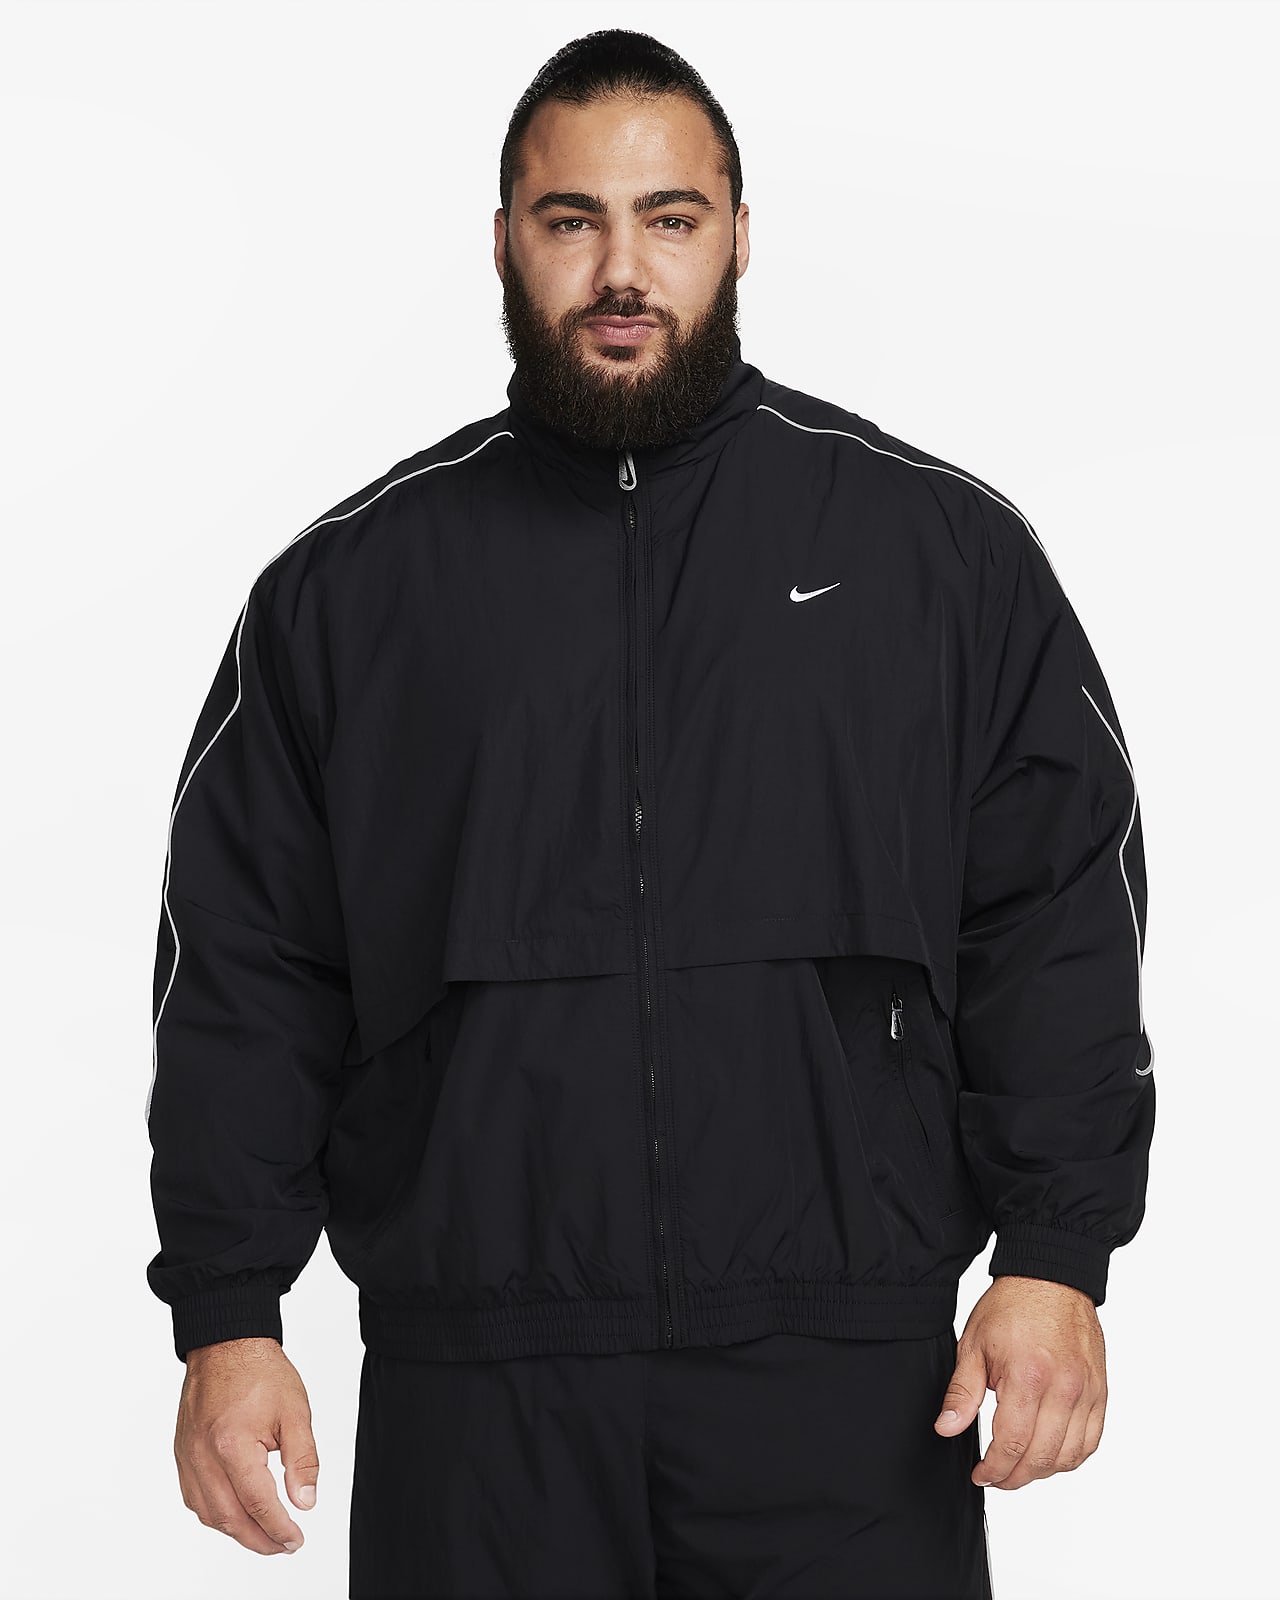 https://static.nike.com/a/images/t_PDP_1280_v1/f_auto,q_auto:eco/7b02eee3-6093-4f06-b109-bc24e0aa6272/sportswear-solo-swoosh-woven-tracksuit-jacket-pXxCn6.png